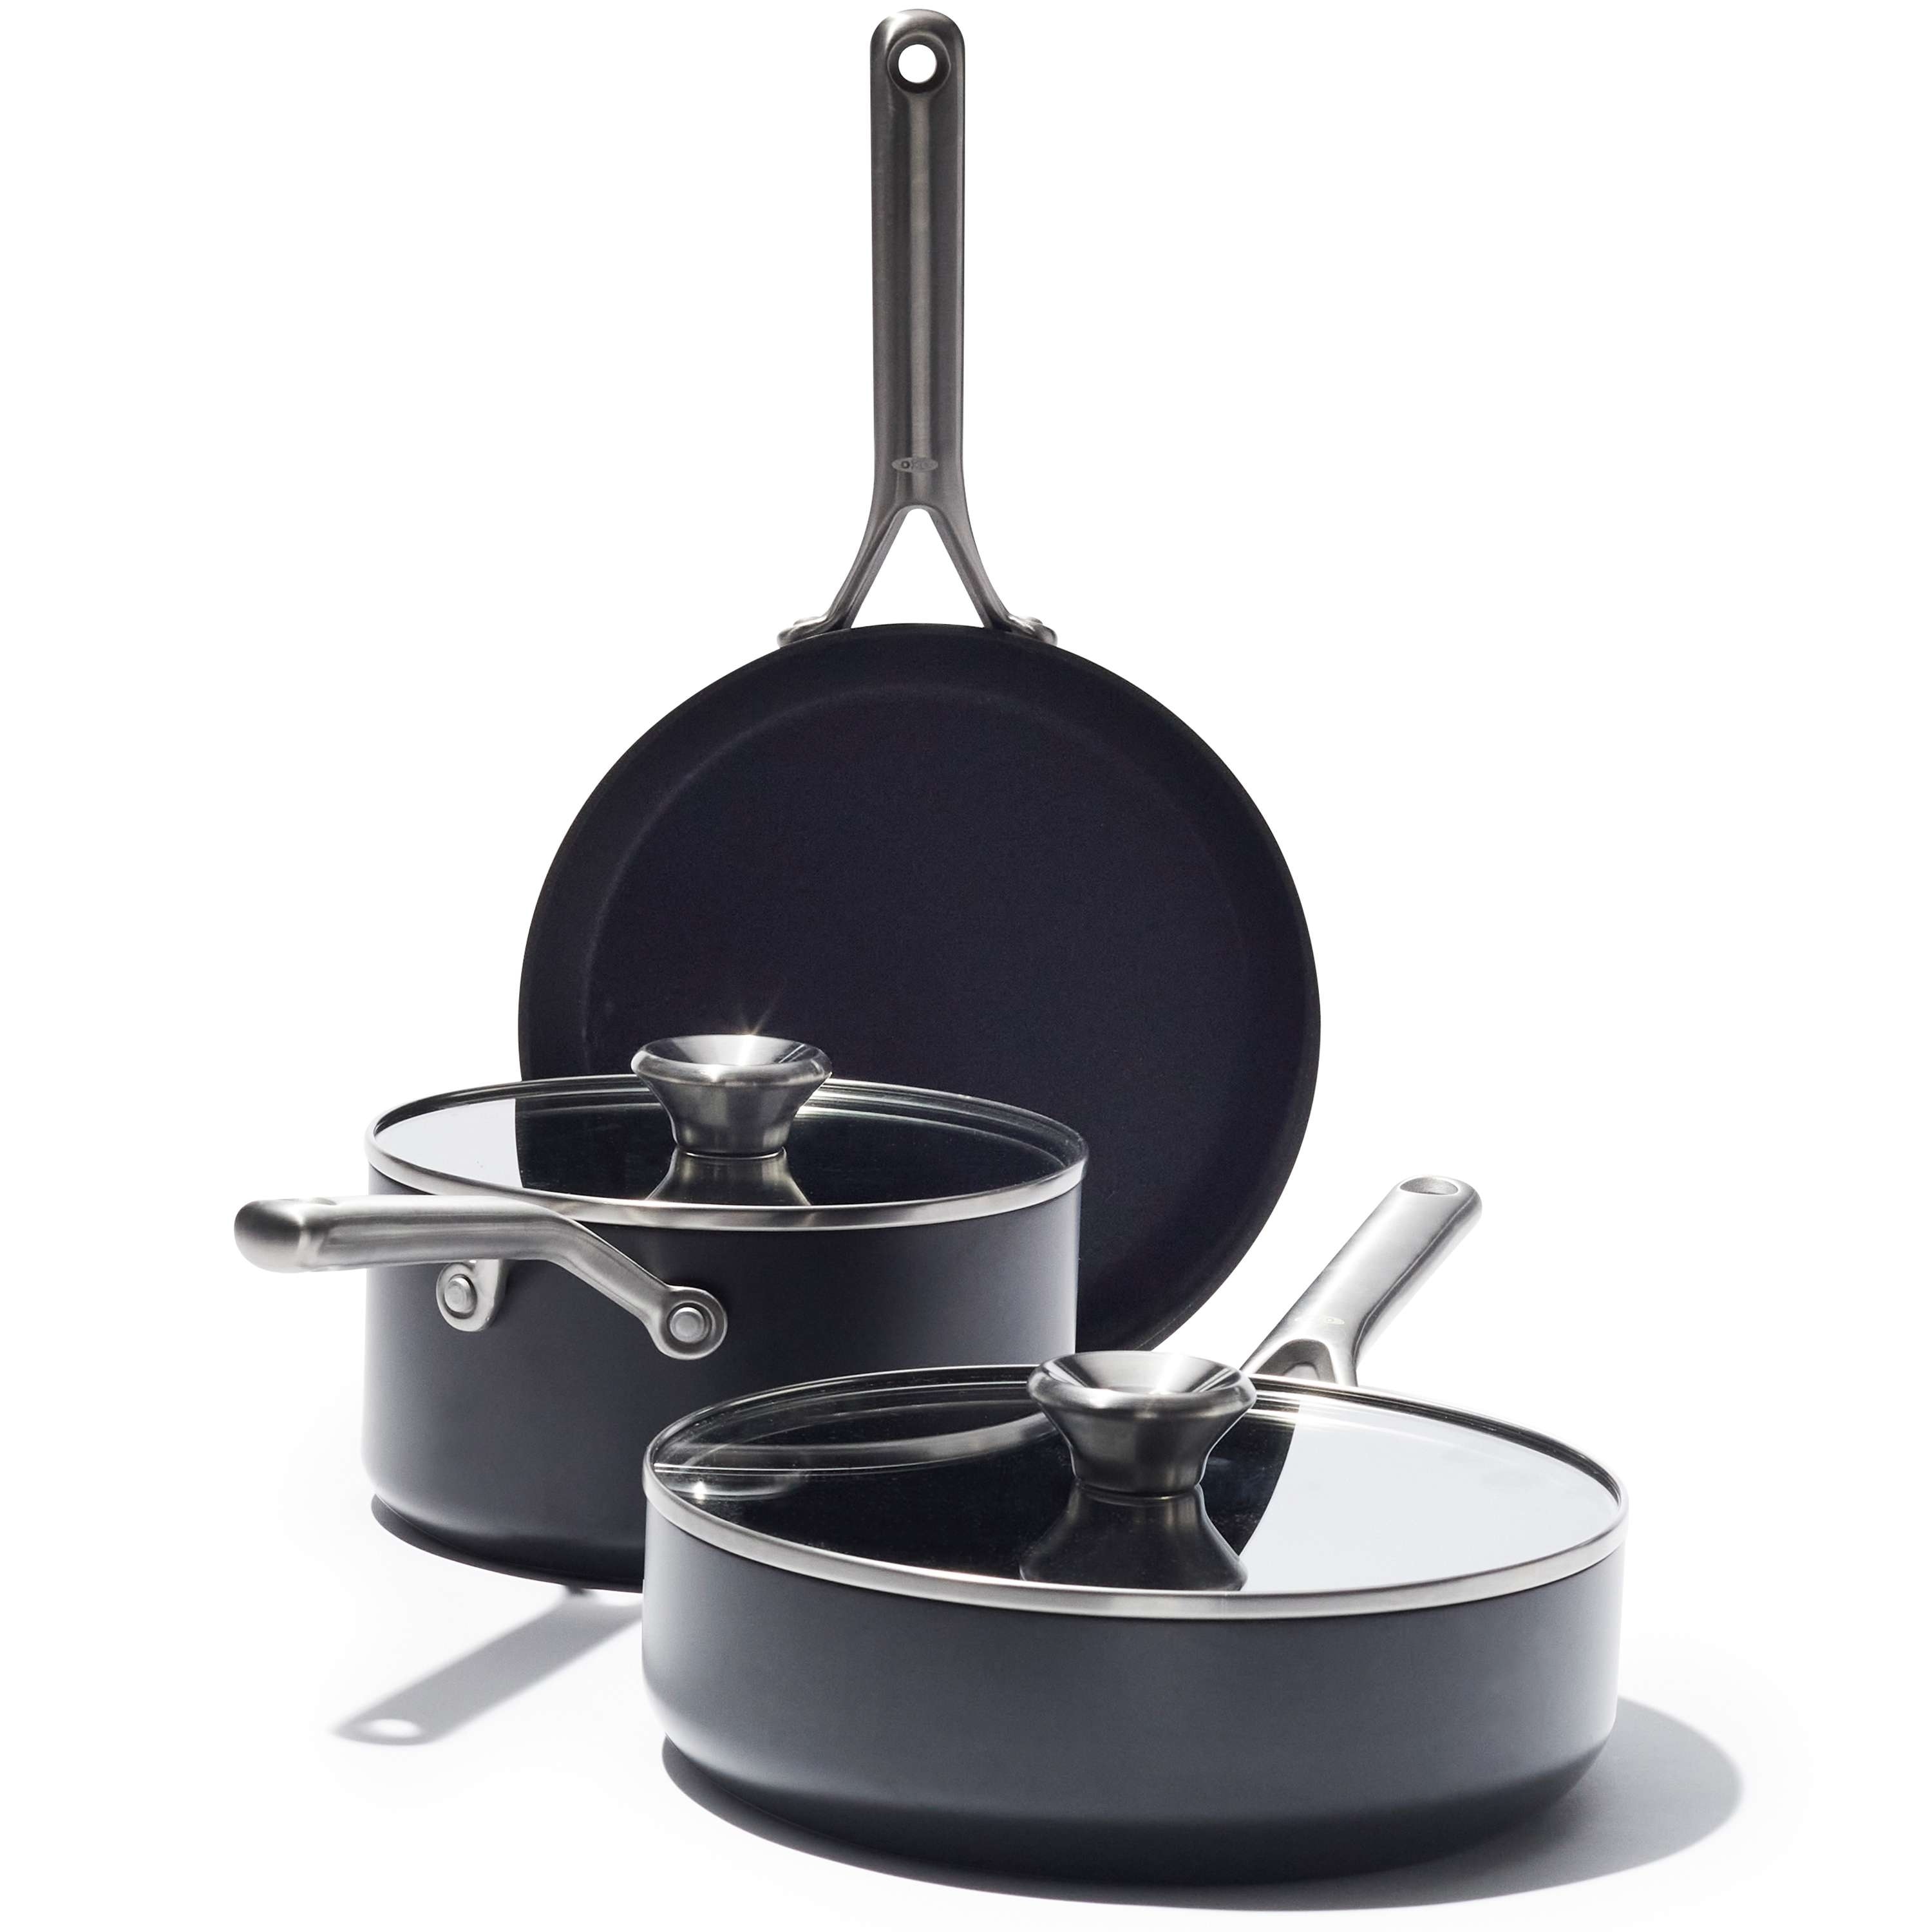 https://ak1.ostkcdn.com/images/products/is/images/direct/f6a7c284314e35d40b58505ba81c87c695ca6e7d/OXO-Professional-Ceramic-Non-Stick-5-Piece-Cookware-Pots-and-Pans-Set.jpg